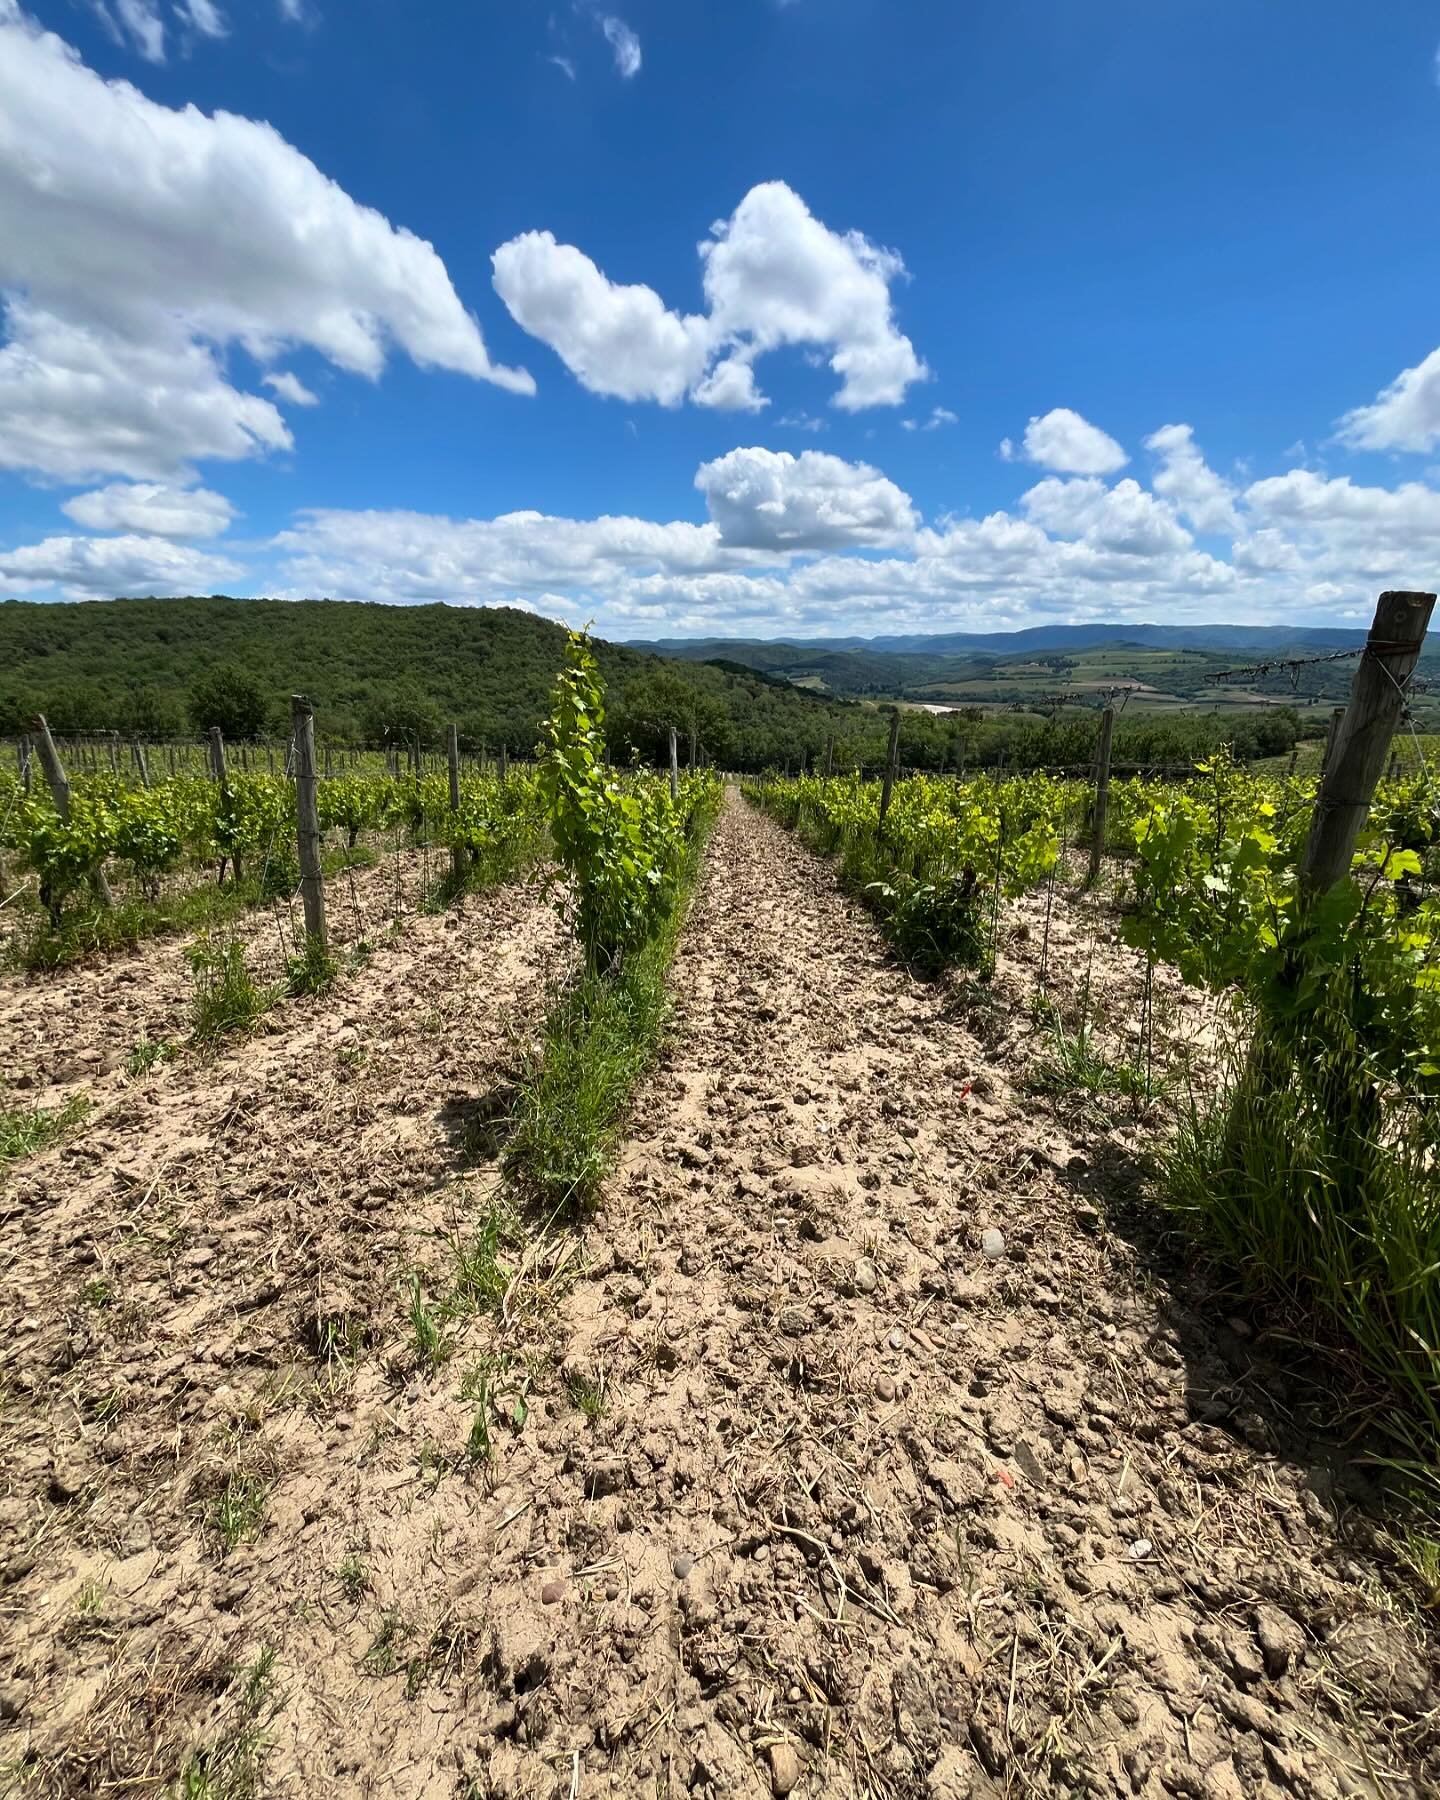 Finally a sunny day after very wet May. Huge storms last weekend with 65mm rain but thankfully no hail. Over 1000ha hit by hail@in Limoux region so we got lucky&hellip;